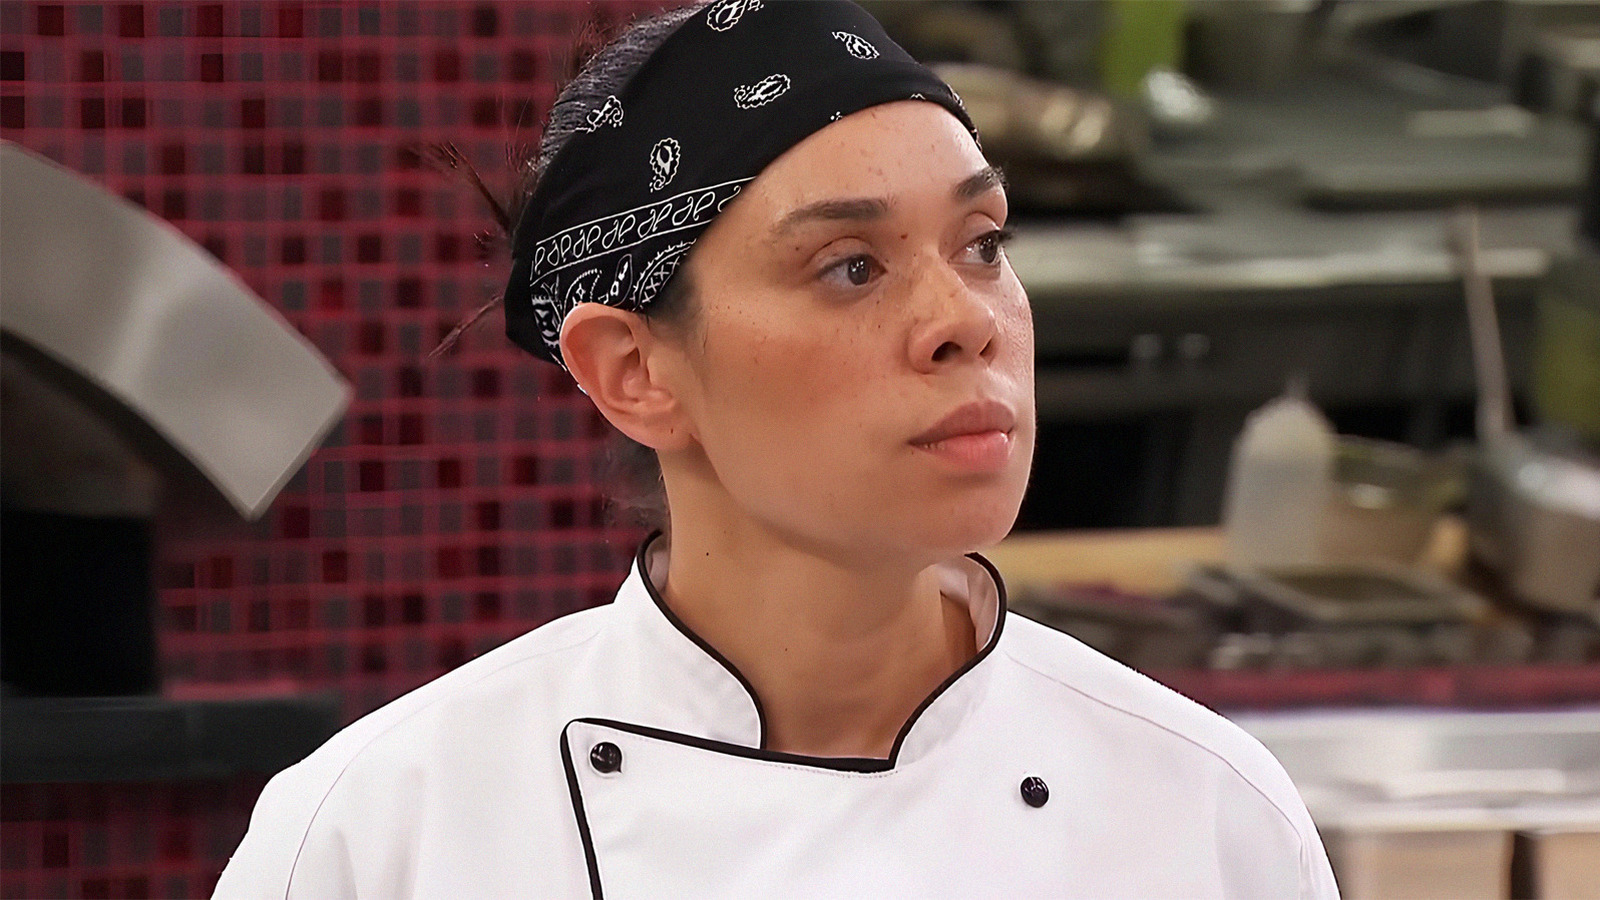 Hell's Kitchen: Why Did Ariel Turn Down The Prize & Where Is She Now?